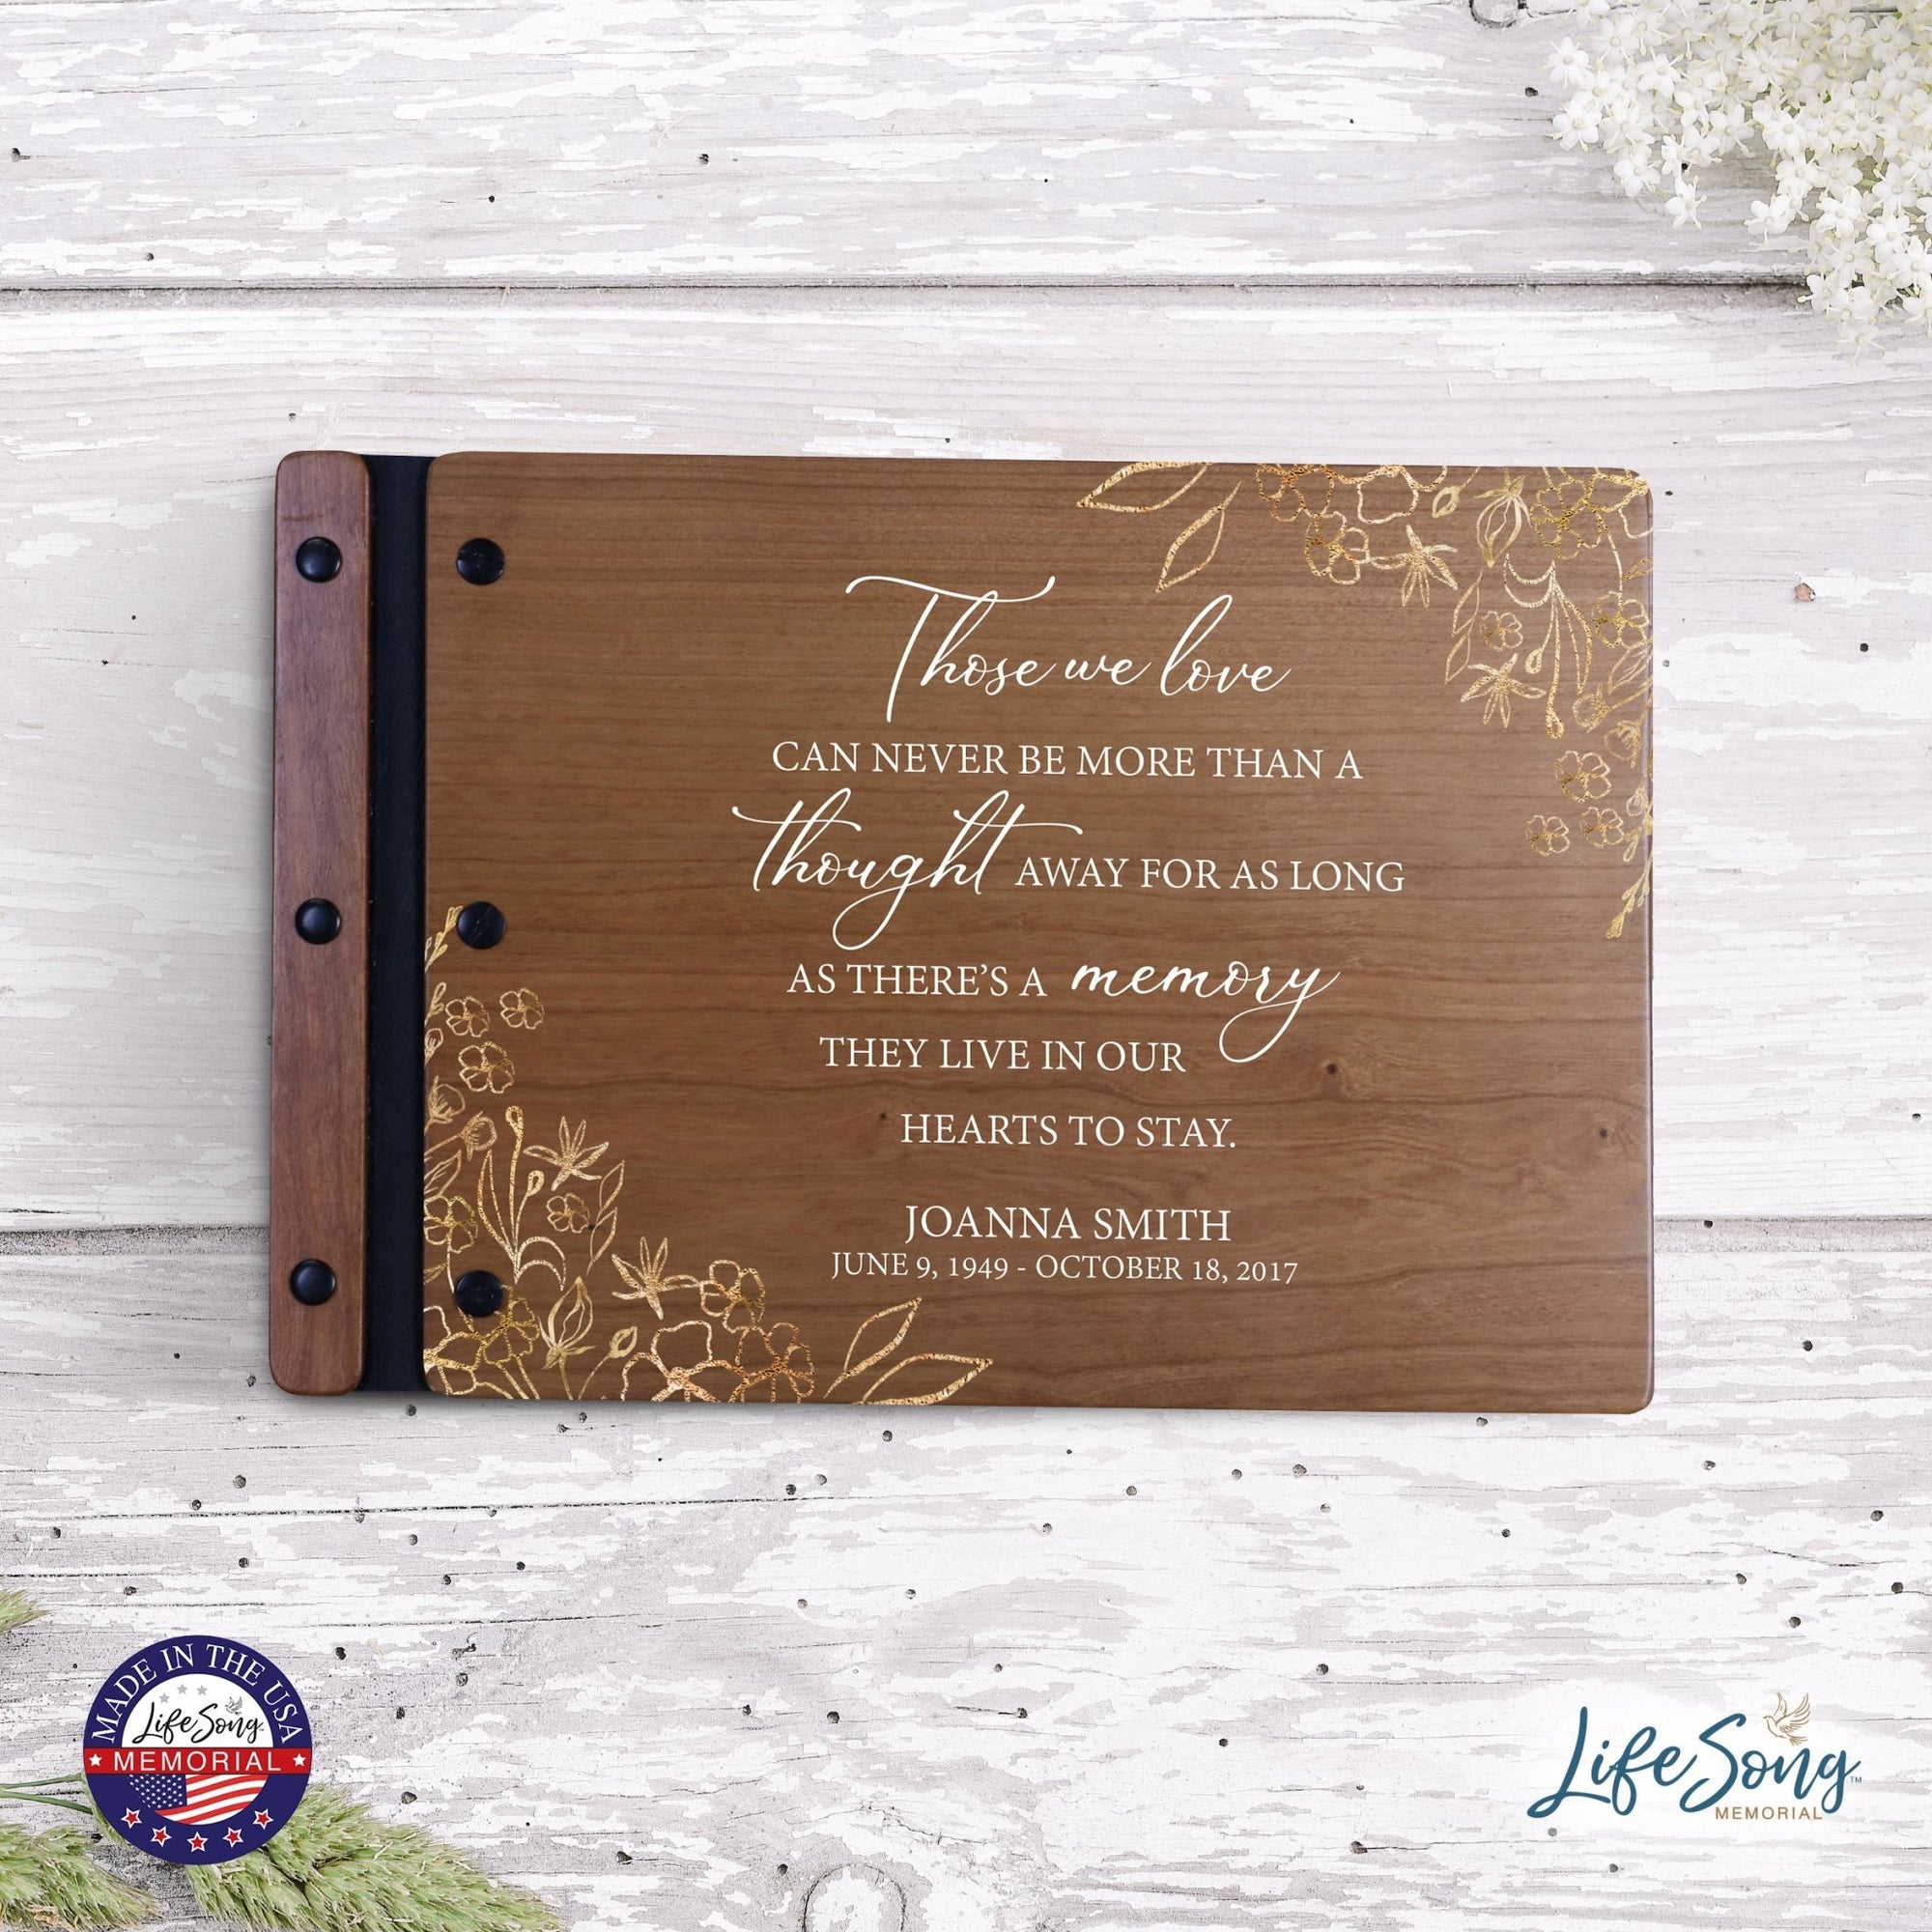 Personalized Medium Wooden Memorial Guestbook 12.375x8.5 - Those We Love (Cherry) - LifeSong Milestones